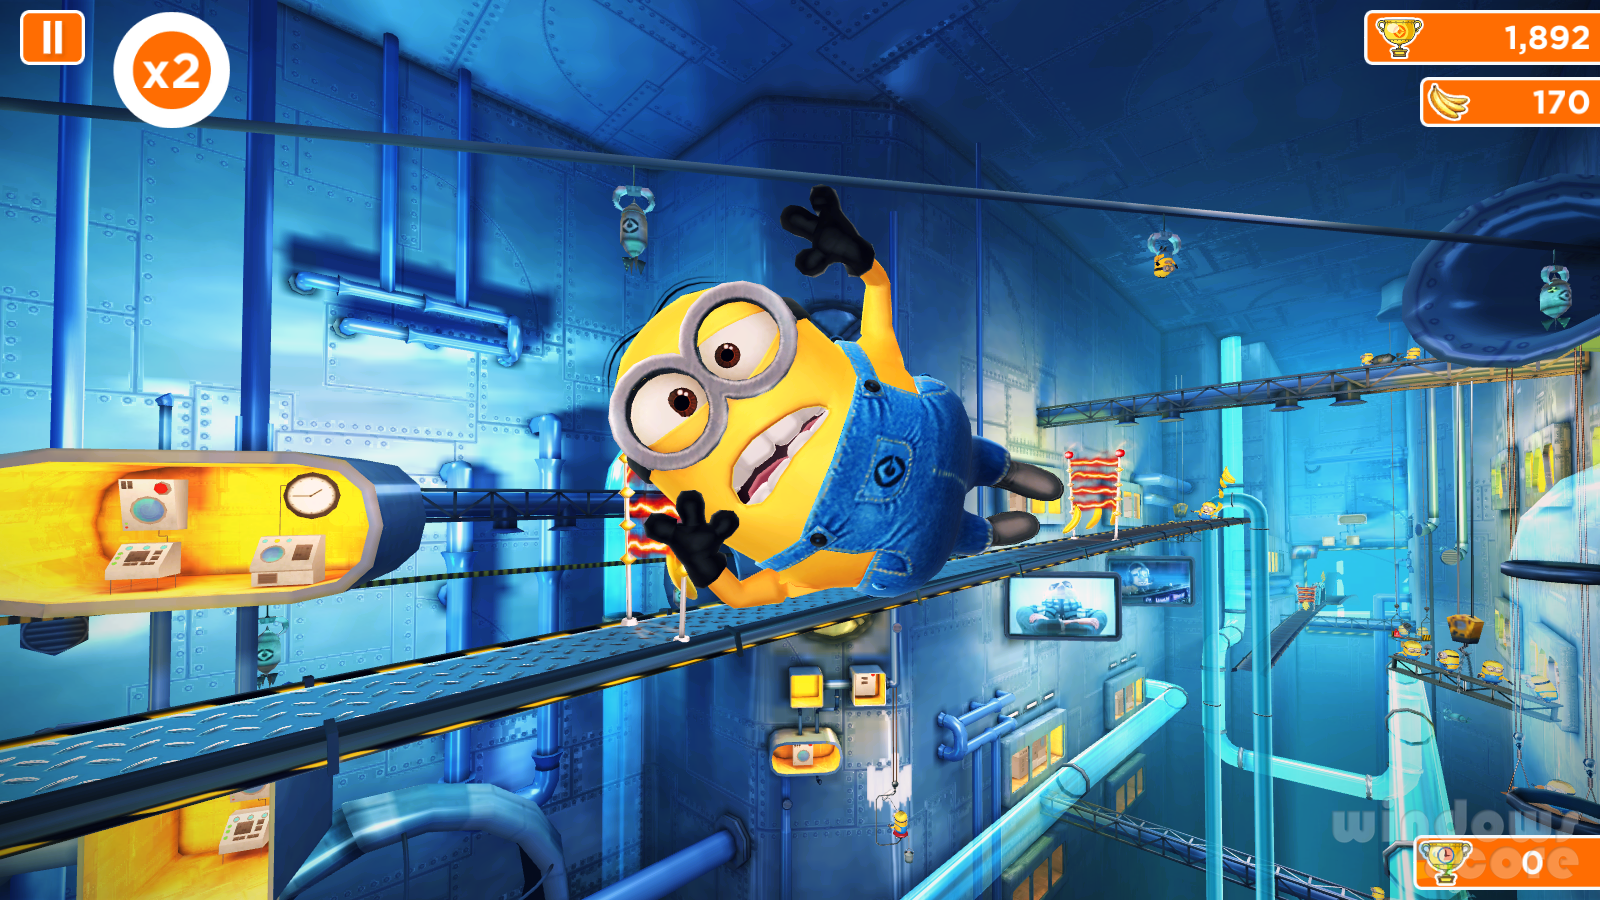 Free download Download Despicable Me Minion Rush for Windows 81